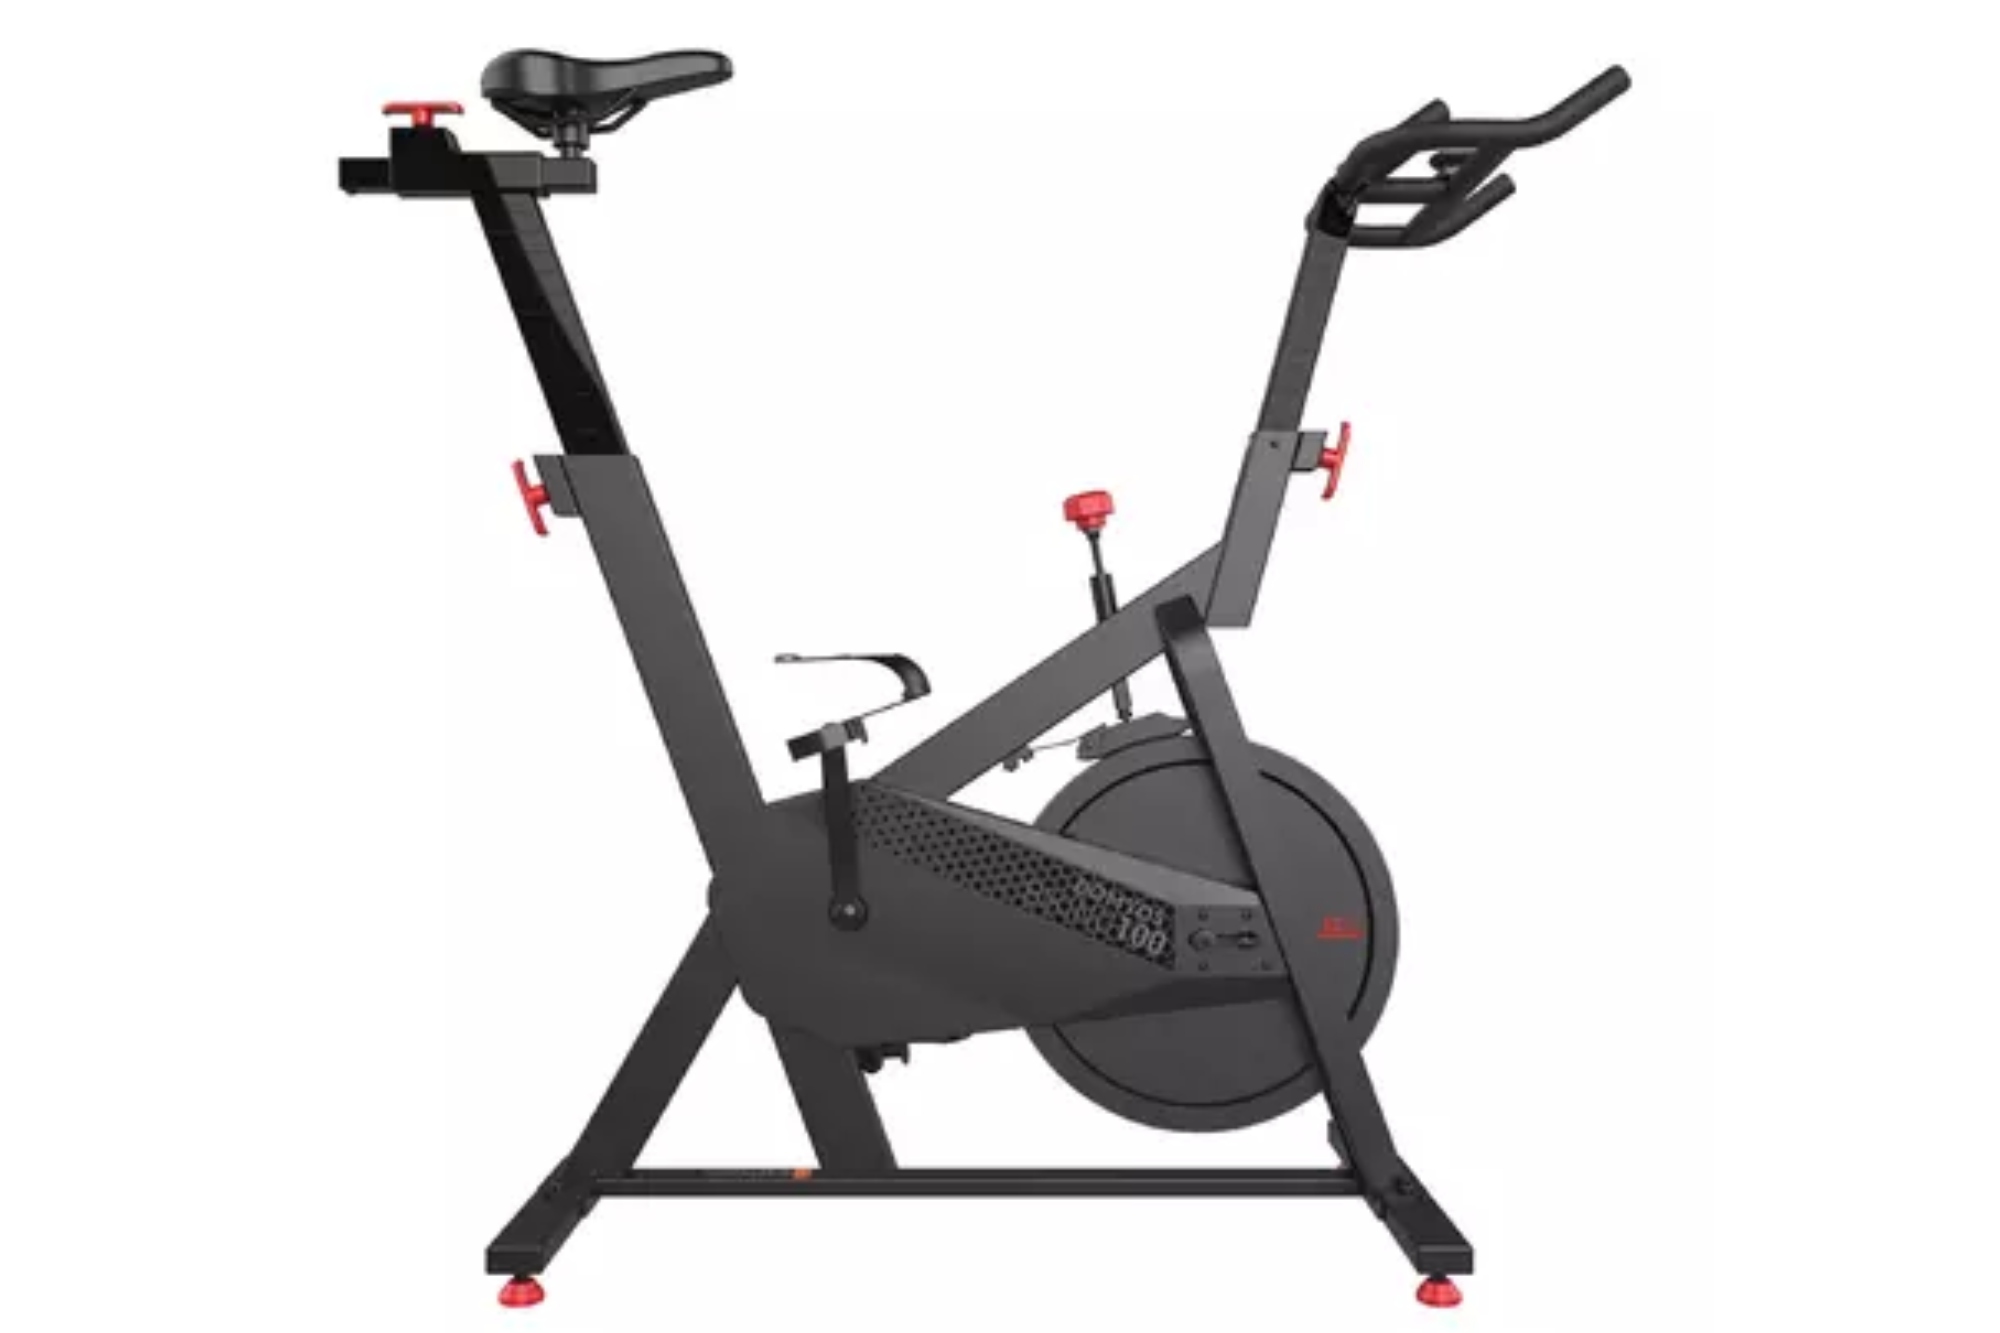 Domyos Basic Exercise Bike 100 is pictured here with front pointing to the right